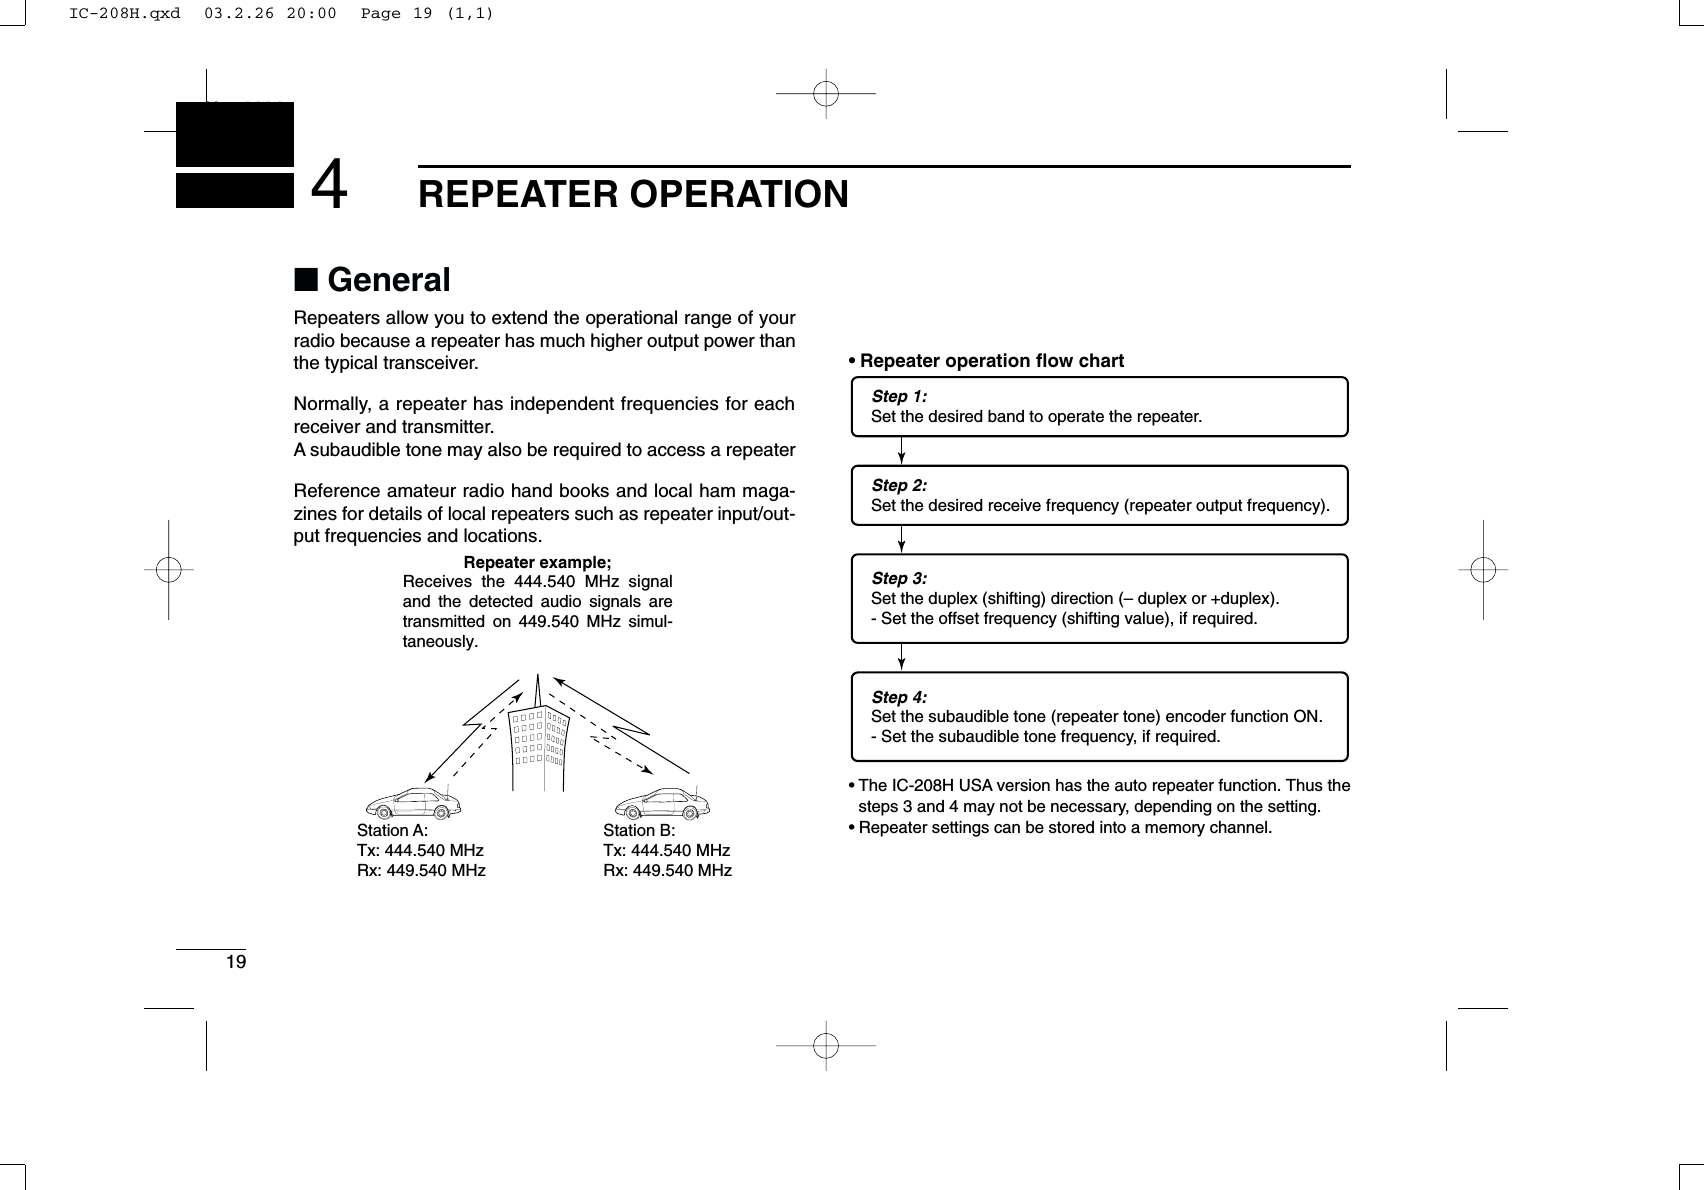 19REPEATER OPERATIONNew20014Repeaters allow you to extend the operational range of yourradio because a repeater has much higher output power thanthe typical transceiver.Normally, a repeater has independent frequencies for eachreceiver and transmitter.A subaudible tone may also be required to access a repeaterReference amateur radio hand books and local ham maga-zines for details of local repeaters such as repeater input/out-put frequencies and locations.•Repeater operation ﬂow chart•The IC-208H USA version has the auto repeater function. Thus thesteps 3 and 4 may not be necessary, depending on the setting.•Repeater settings can be stored into a memory channel. Step 3:Set the duplex (shifting) direction (– duplex or +duplex).- Set the offset frequency (shifting value), if required.Step 4:Set the subaudible tone (repeater tone) encoder function ON.- Set the subaudible tone frequency, if required.Step 1:Set the desired band to operate the repeater.Step 2:Set the desired receive frequency (repeater output frequency).Repeater example;Receives the 444.540 MHz signal and the detected audio signals are transmitted on 449.540 MHz simul-taneously.Station A:Tx: 444.540 MHzRx: 449.540 MHzStation B:Tx: 444.540 MHzRx: 449.540 MHz■GeneralIC-208H.qxd  03.2.26 20:00  Page 19 (1,1)